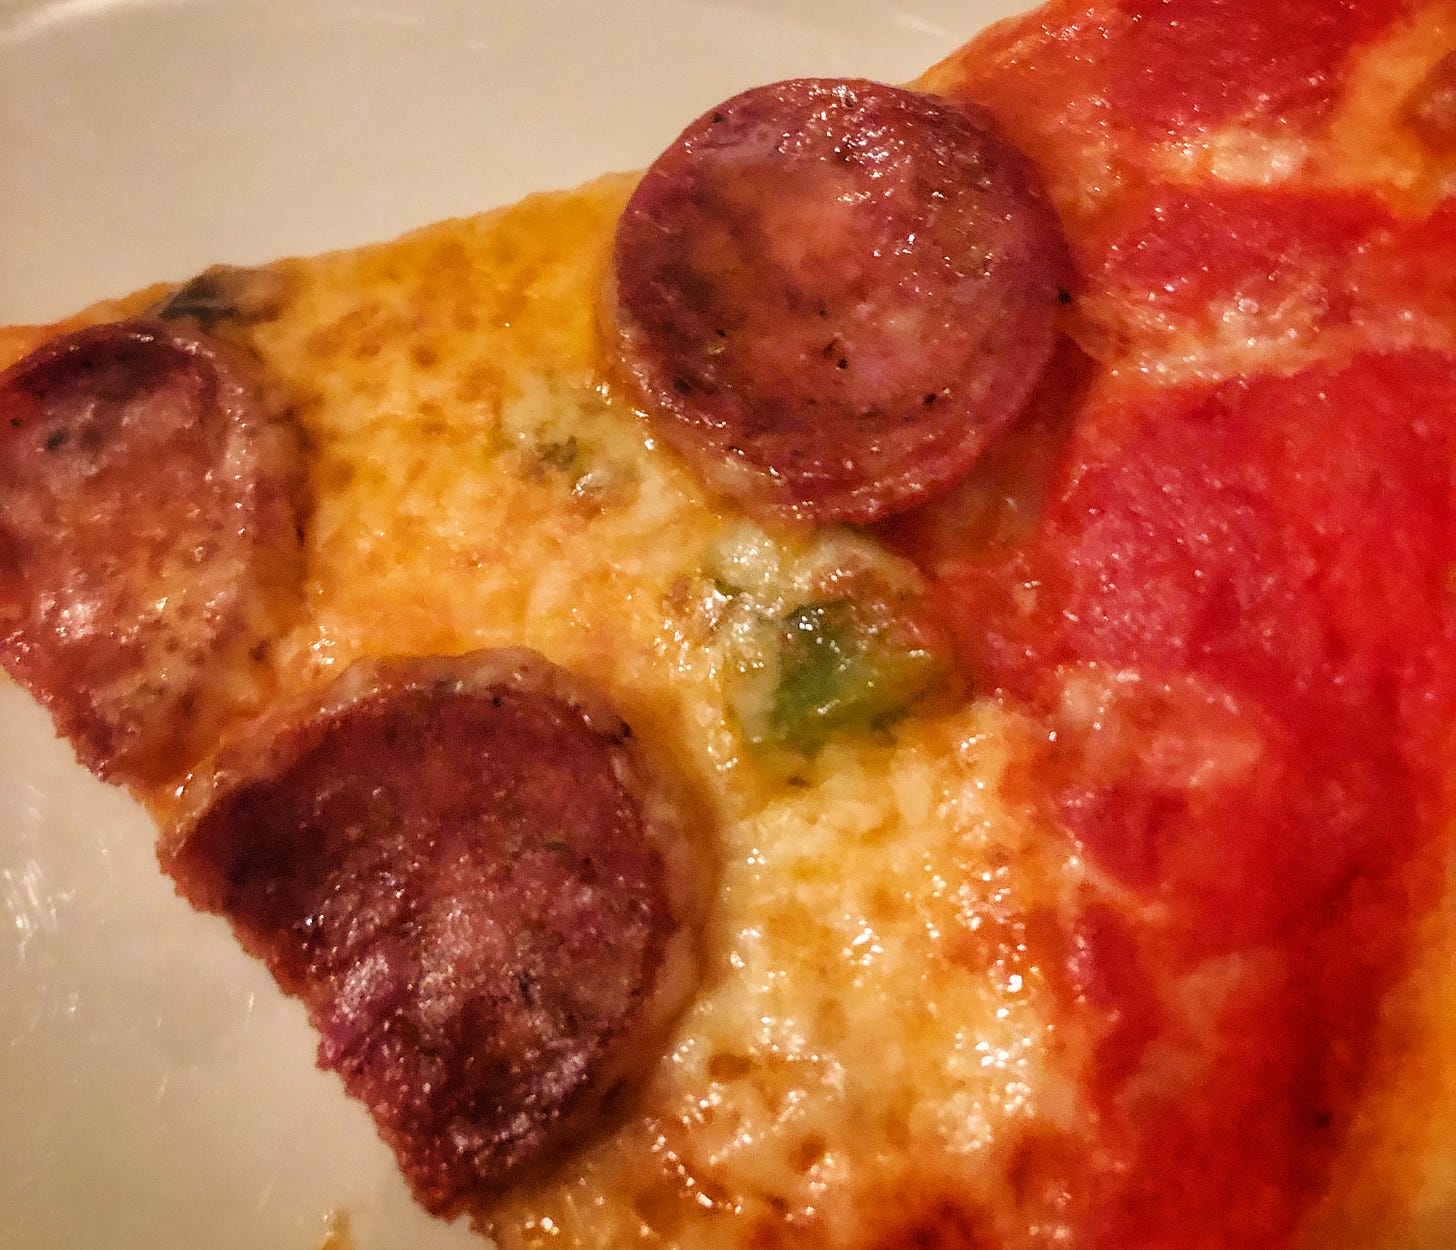 Close up of a slice of pepperoni pizza. The pepperoni has curled up into charred cups.